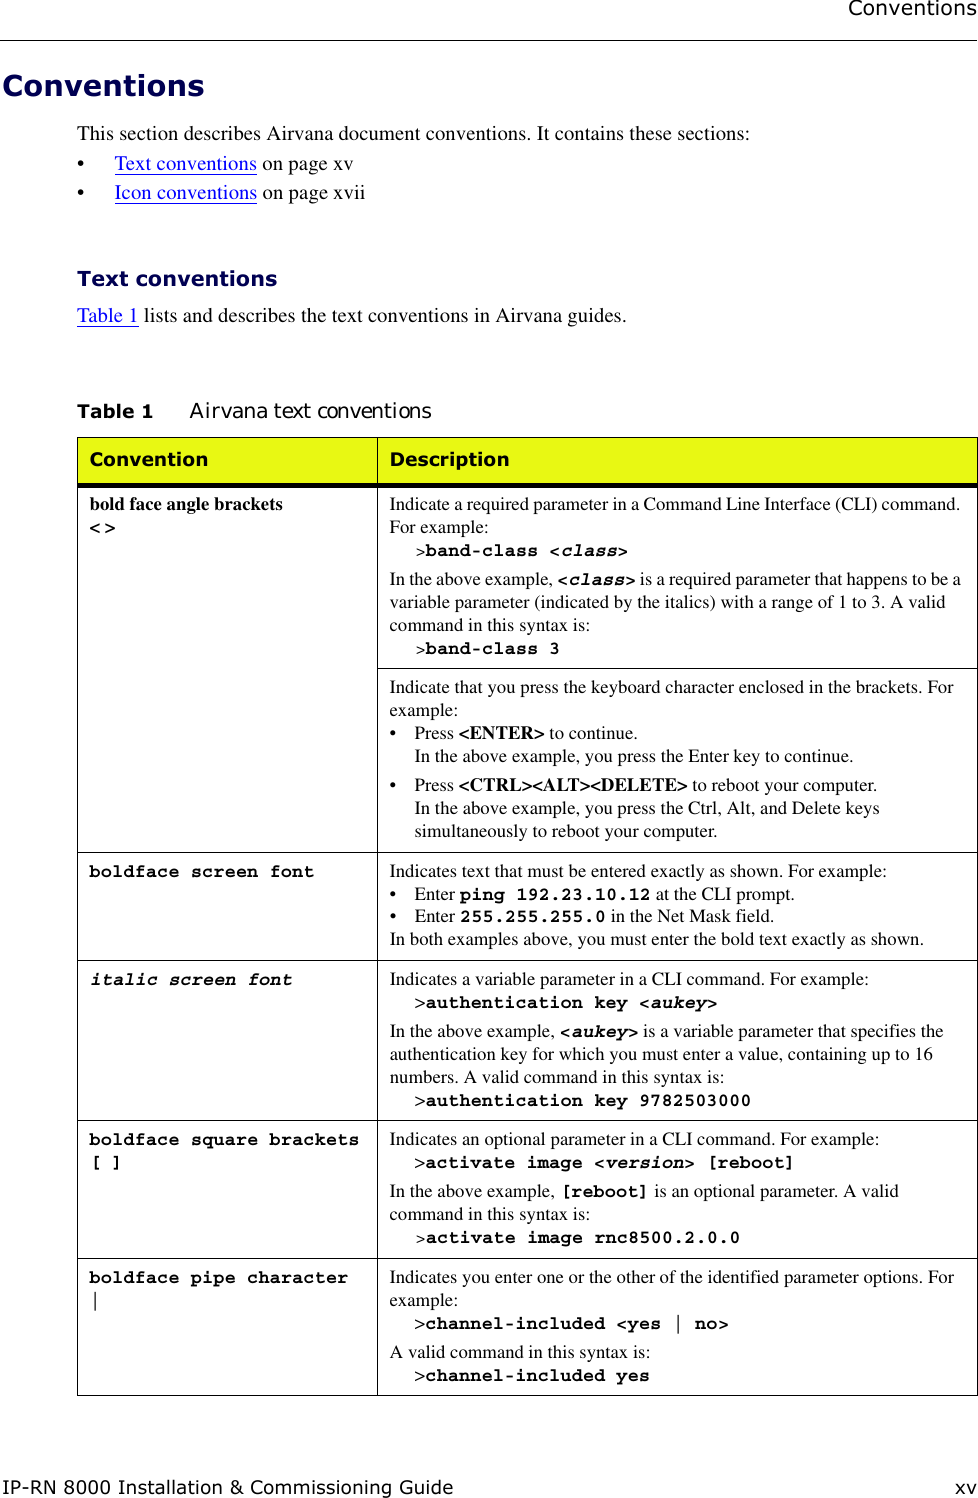 ConventionsIP-RN 8000 Installation &amp; Commissioning Guide xvConventionsThis section describes Airvana document conventions. It contains these sections:•Text conventions on page xv•Icon conventions on page xvii Text conventionsTable 1 lists and describes the text conventions in Airvana guides.Table 1 Airvana text conventionsConvention Descriptionbold face angle brackets&lt; &gt; Indicate a required parameter in a Command Line Interface (CLI) command. For example:&gt;band-class &lt;class&gt;In the above example, &lt;class&gt; is a required parameter that happens to be a variable parameter (indicated by the italics) with a range of 1 to 3. A valid command in this syntax is:&gt;band-class 3Indicate that you press the keyboard character enclosed in the brackets. For example:• Press &lt;ENTER&gt; to continue.In the above example, you press the Enter key to continue.• Press &lt;CTRL&gt;&lt;ALT&gt;&lt;DELETE&gt; to reboot your computer. In the above example, you press the Ctrl, Alt, and Delete keys simultaneously to reboot your computer.boldface screen font Indicates text that must be entered exactly as shown. For example:•Enter ping 192.23.10.12 at the CLI prompt.•Enter 255.255.255.0 in the Net Mask field.In both examples above, you must enter the bold text exactly as shown.italic screen font Indicates a variable parameter in a CLI command. For example:&gt;authentication key &lt;aukey&gt;In the above example, &lt;aukey&gt; is a variable parameter that specifies the authentication key for which you must enter a value, containing up to 16 numbers. A valid command in this syntax is:&gt;authentication key 9782503000boldface square brackets[ ]Indicates an optional parameter in a CLI command. For example:&gt;activate image &lt;version&gt; [reboot]In the above example, [reboot] is an optional parameter. A valid command in this syntax is:&gt;activate image rnc8500.2.0.0boldface pipe character|Indicates you enter one or the other of the identified parameter options. For example:&gt;channel-included &lt;yes | no&gt;A valid command in this syntax is:&gt;channel-included yes